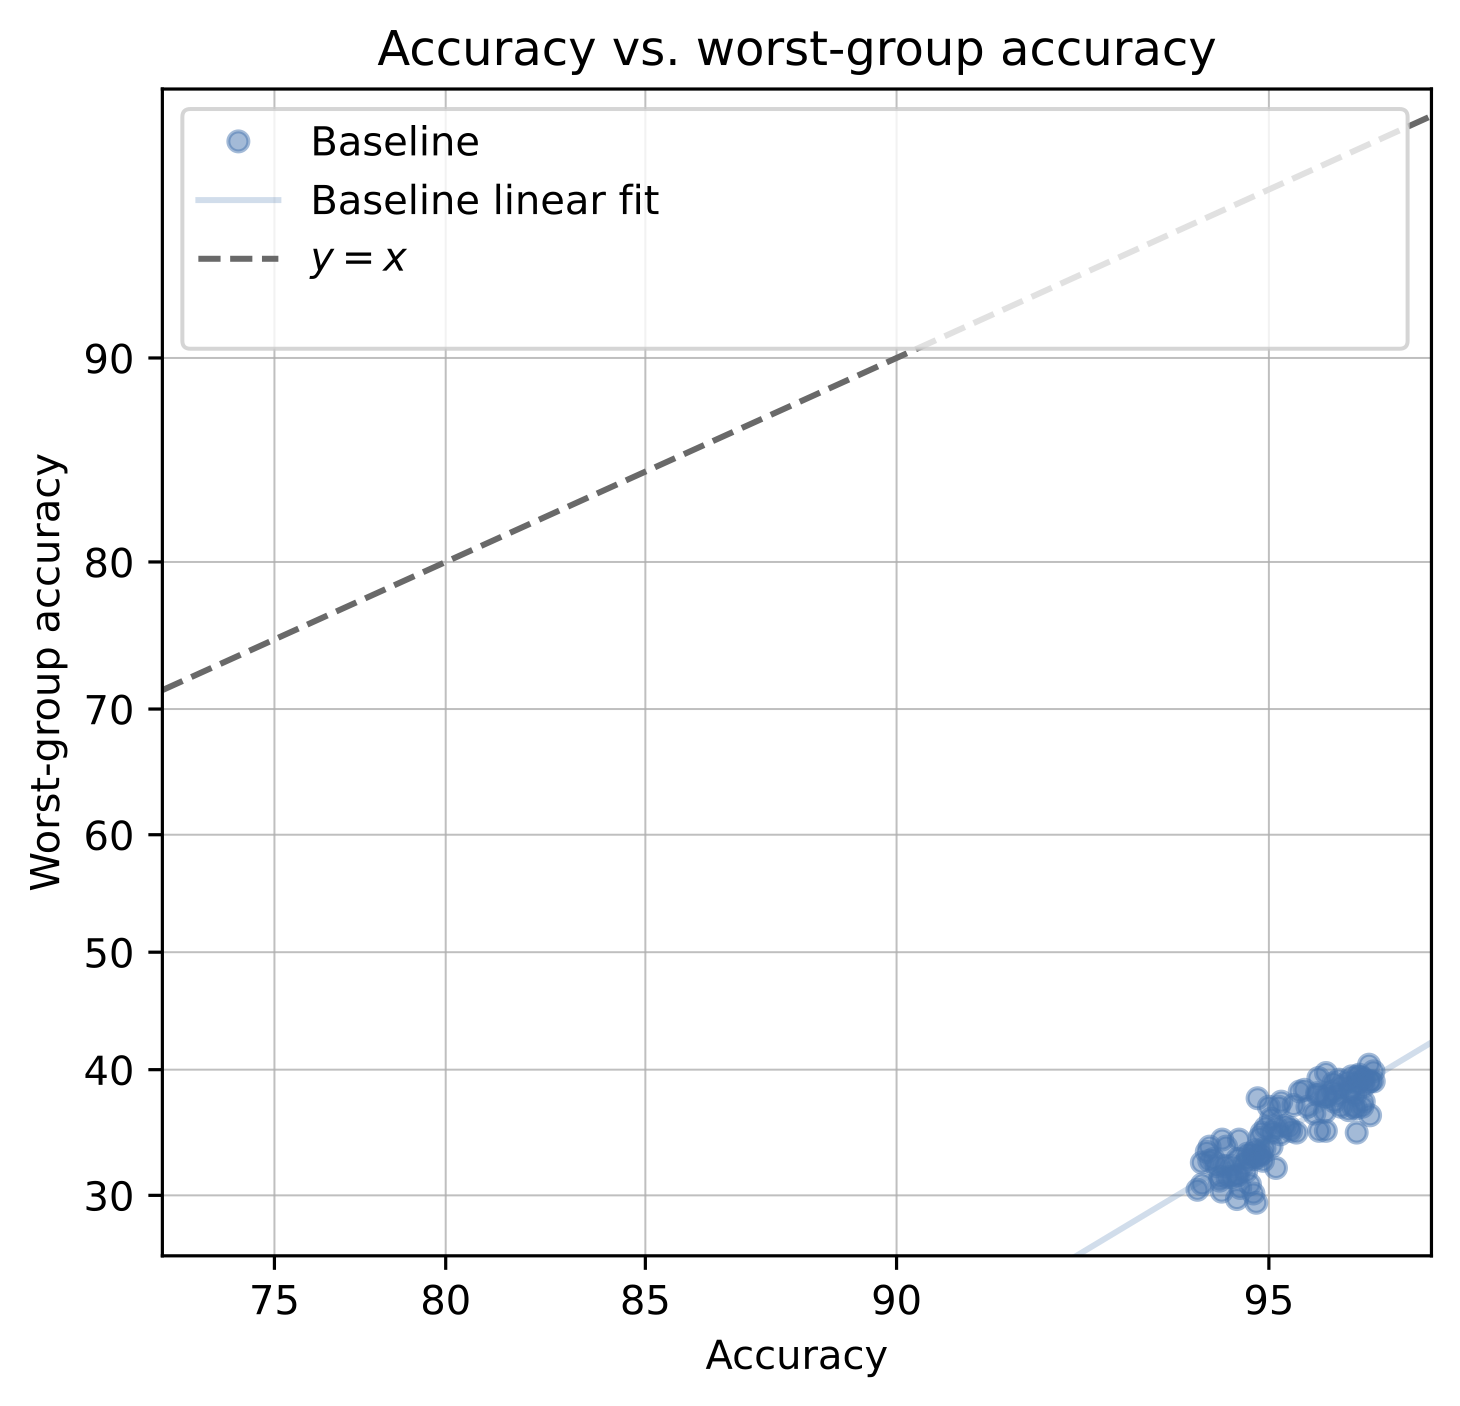 A scatterplot of accuracy vs. worst-group accuracy for models trained from scratch on CelebA